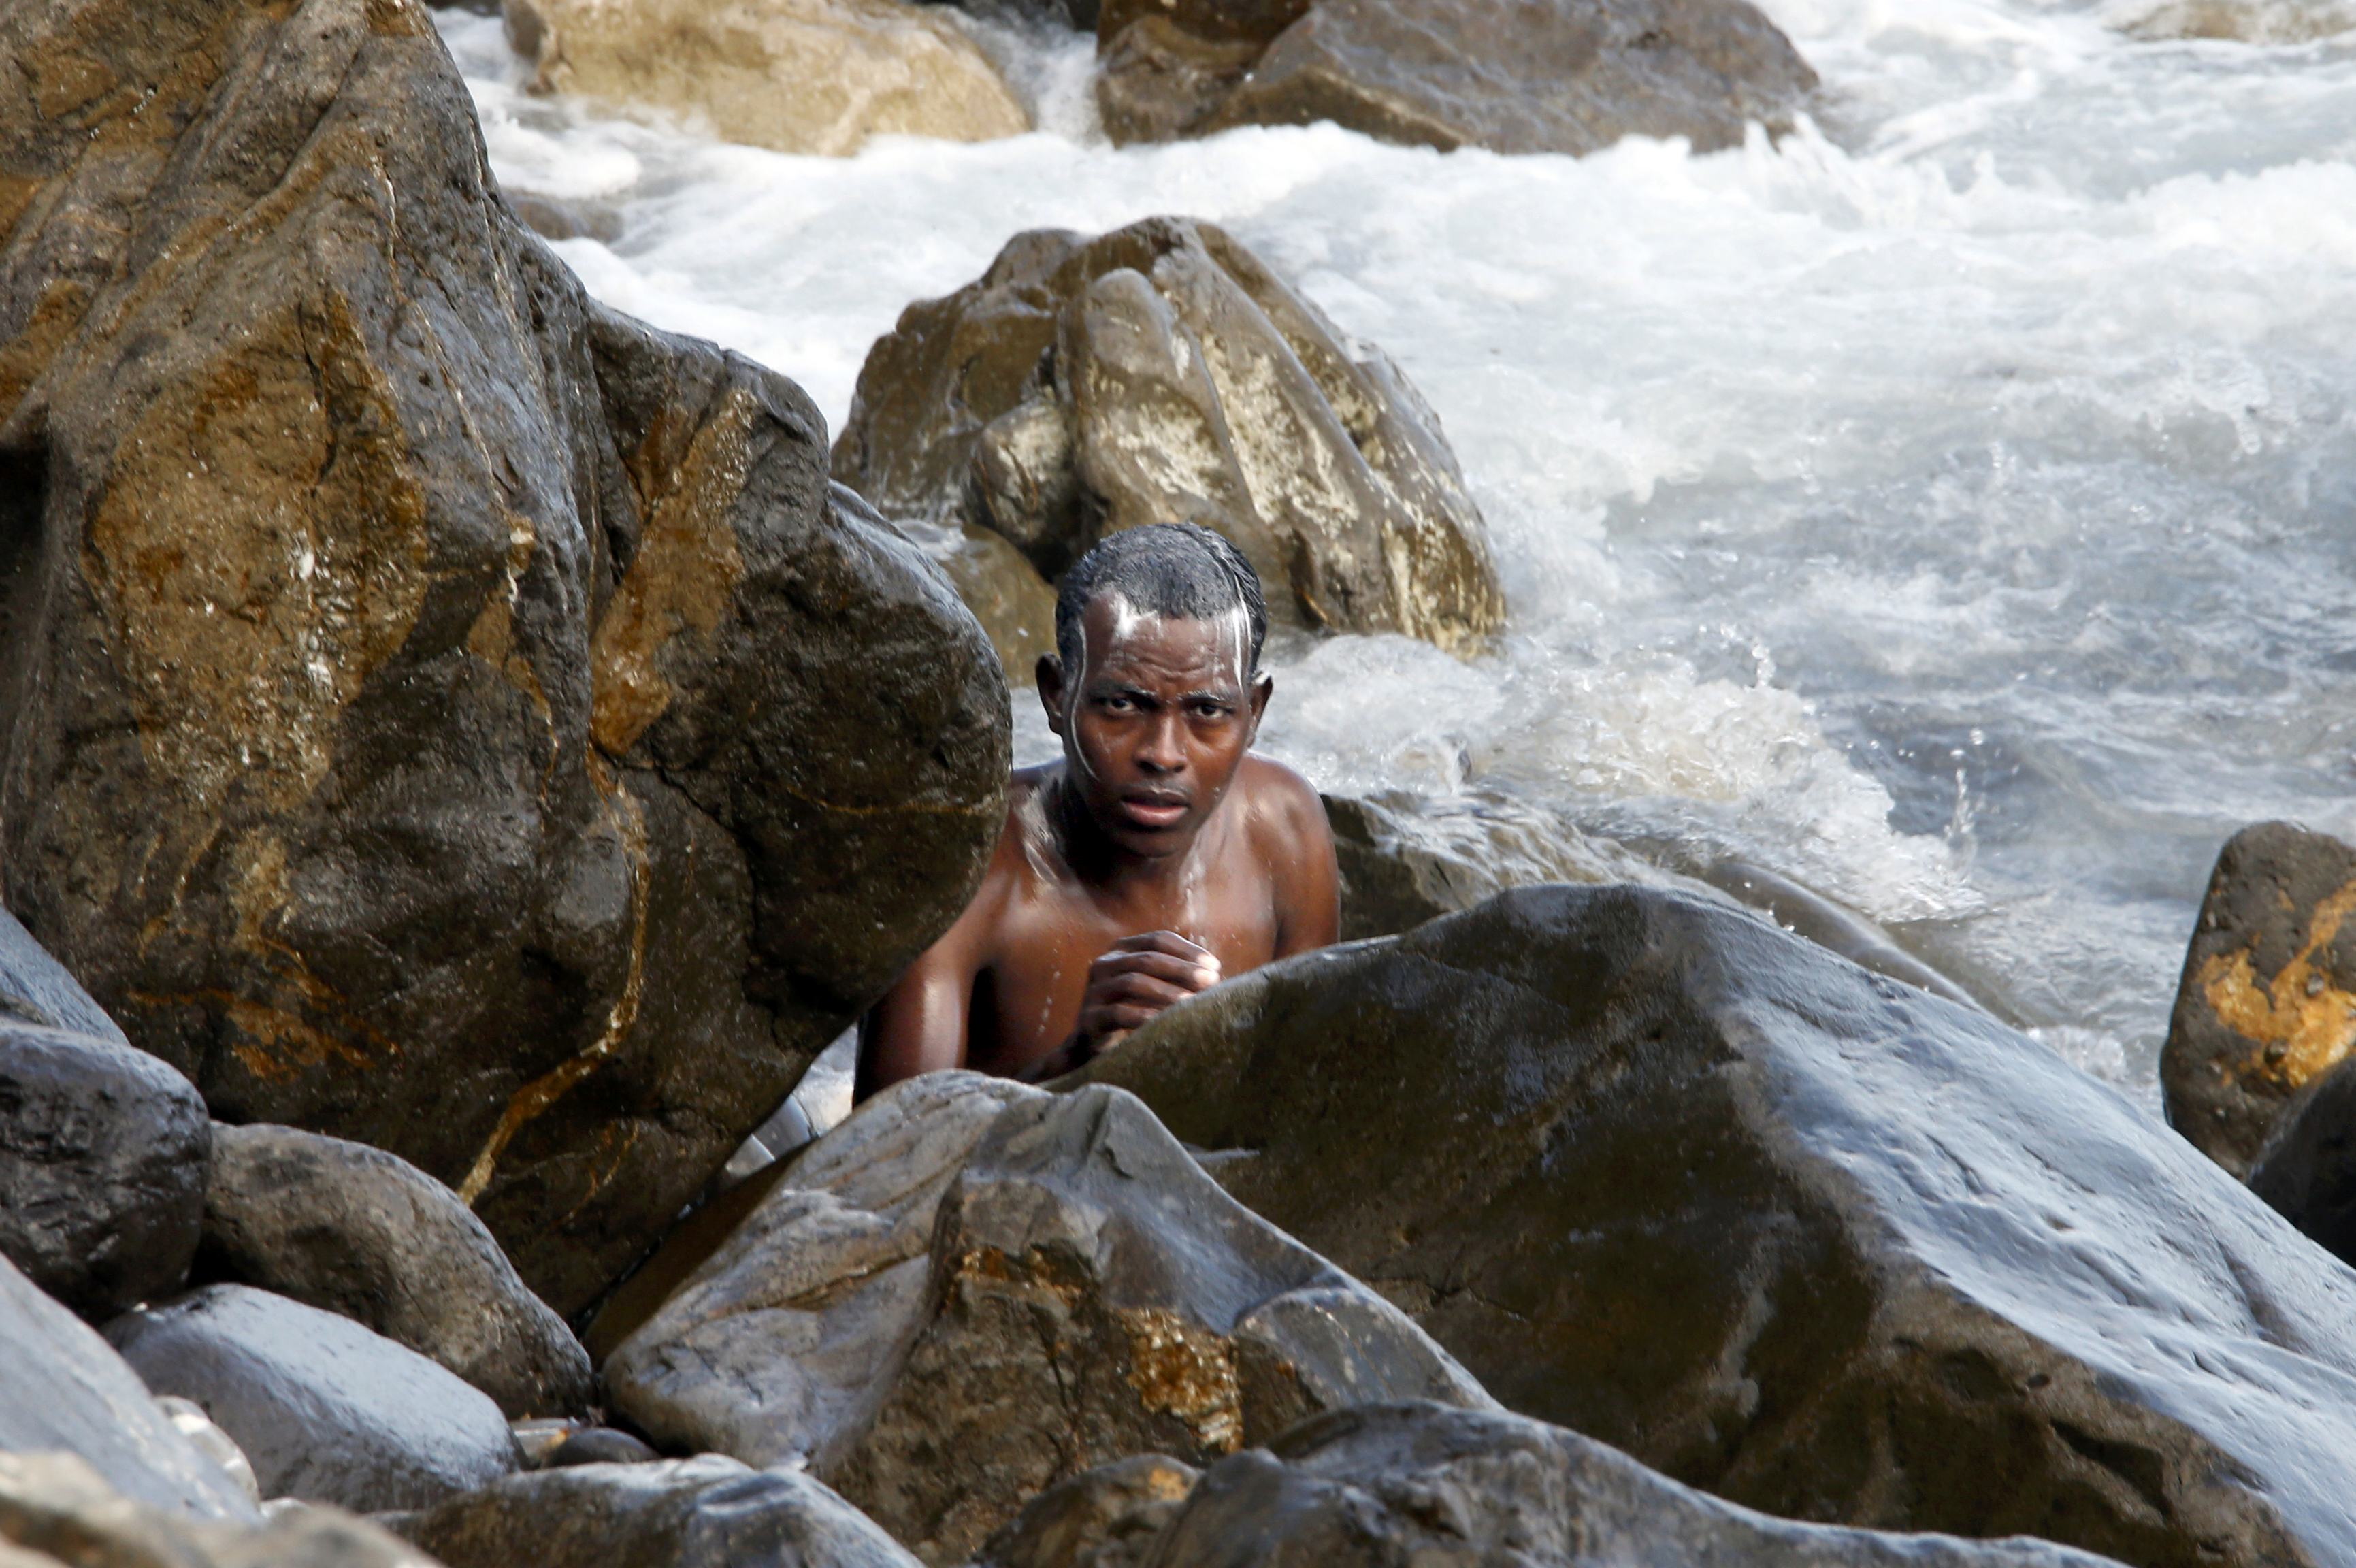 A migrant uses soap to bathe in the sea at the Saint Ludovic border crossing on the Mediterranean Sea between Vintimille, Italy and Menton, France, June 14, 2015. On Saturday, some 200 migrants, principally from Eritrea and Sudan who attempted to cross the border, were blocked by Italian police and French gendarmes. REUTERS/Eric Gaillard TPX IMAGES OF THE DAY